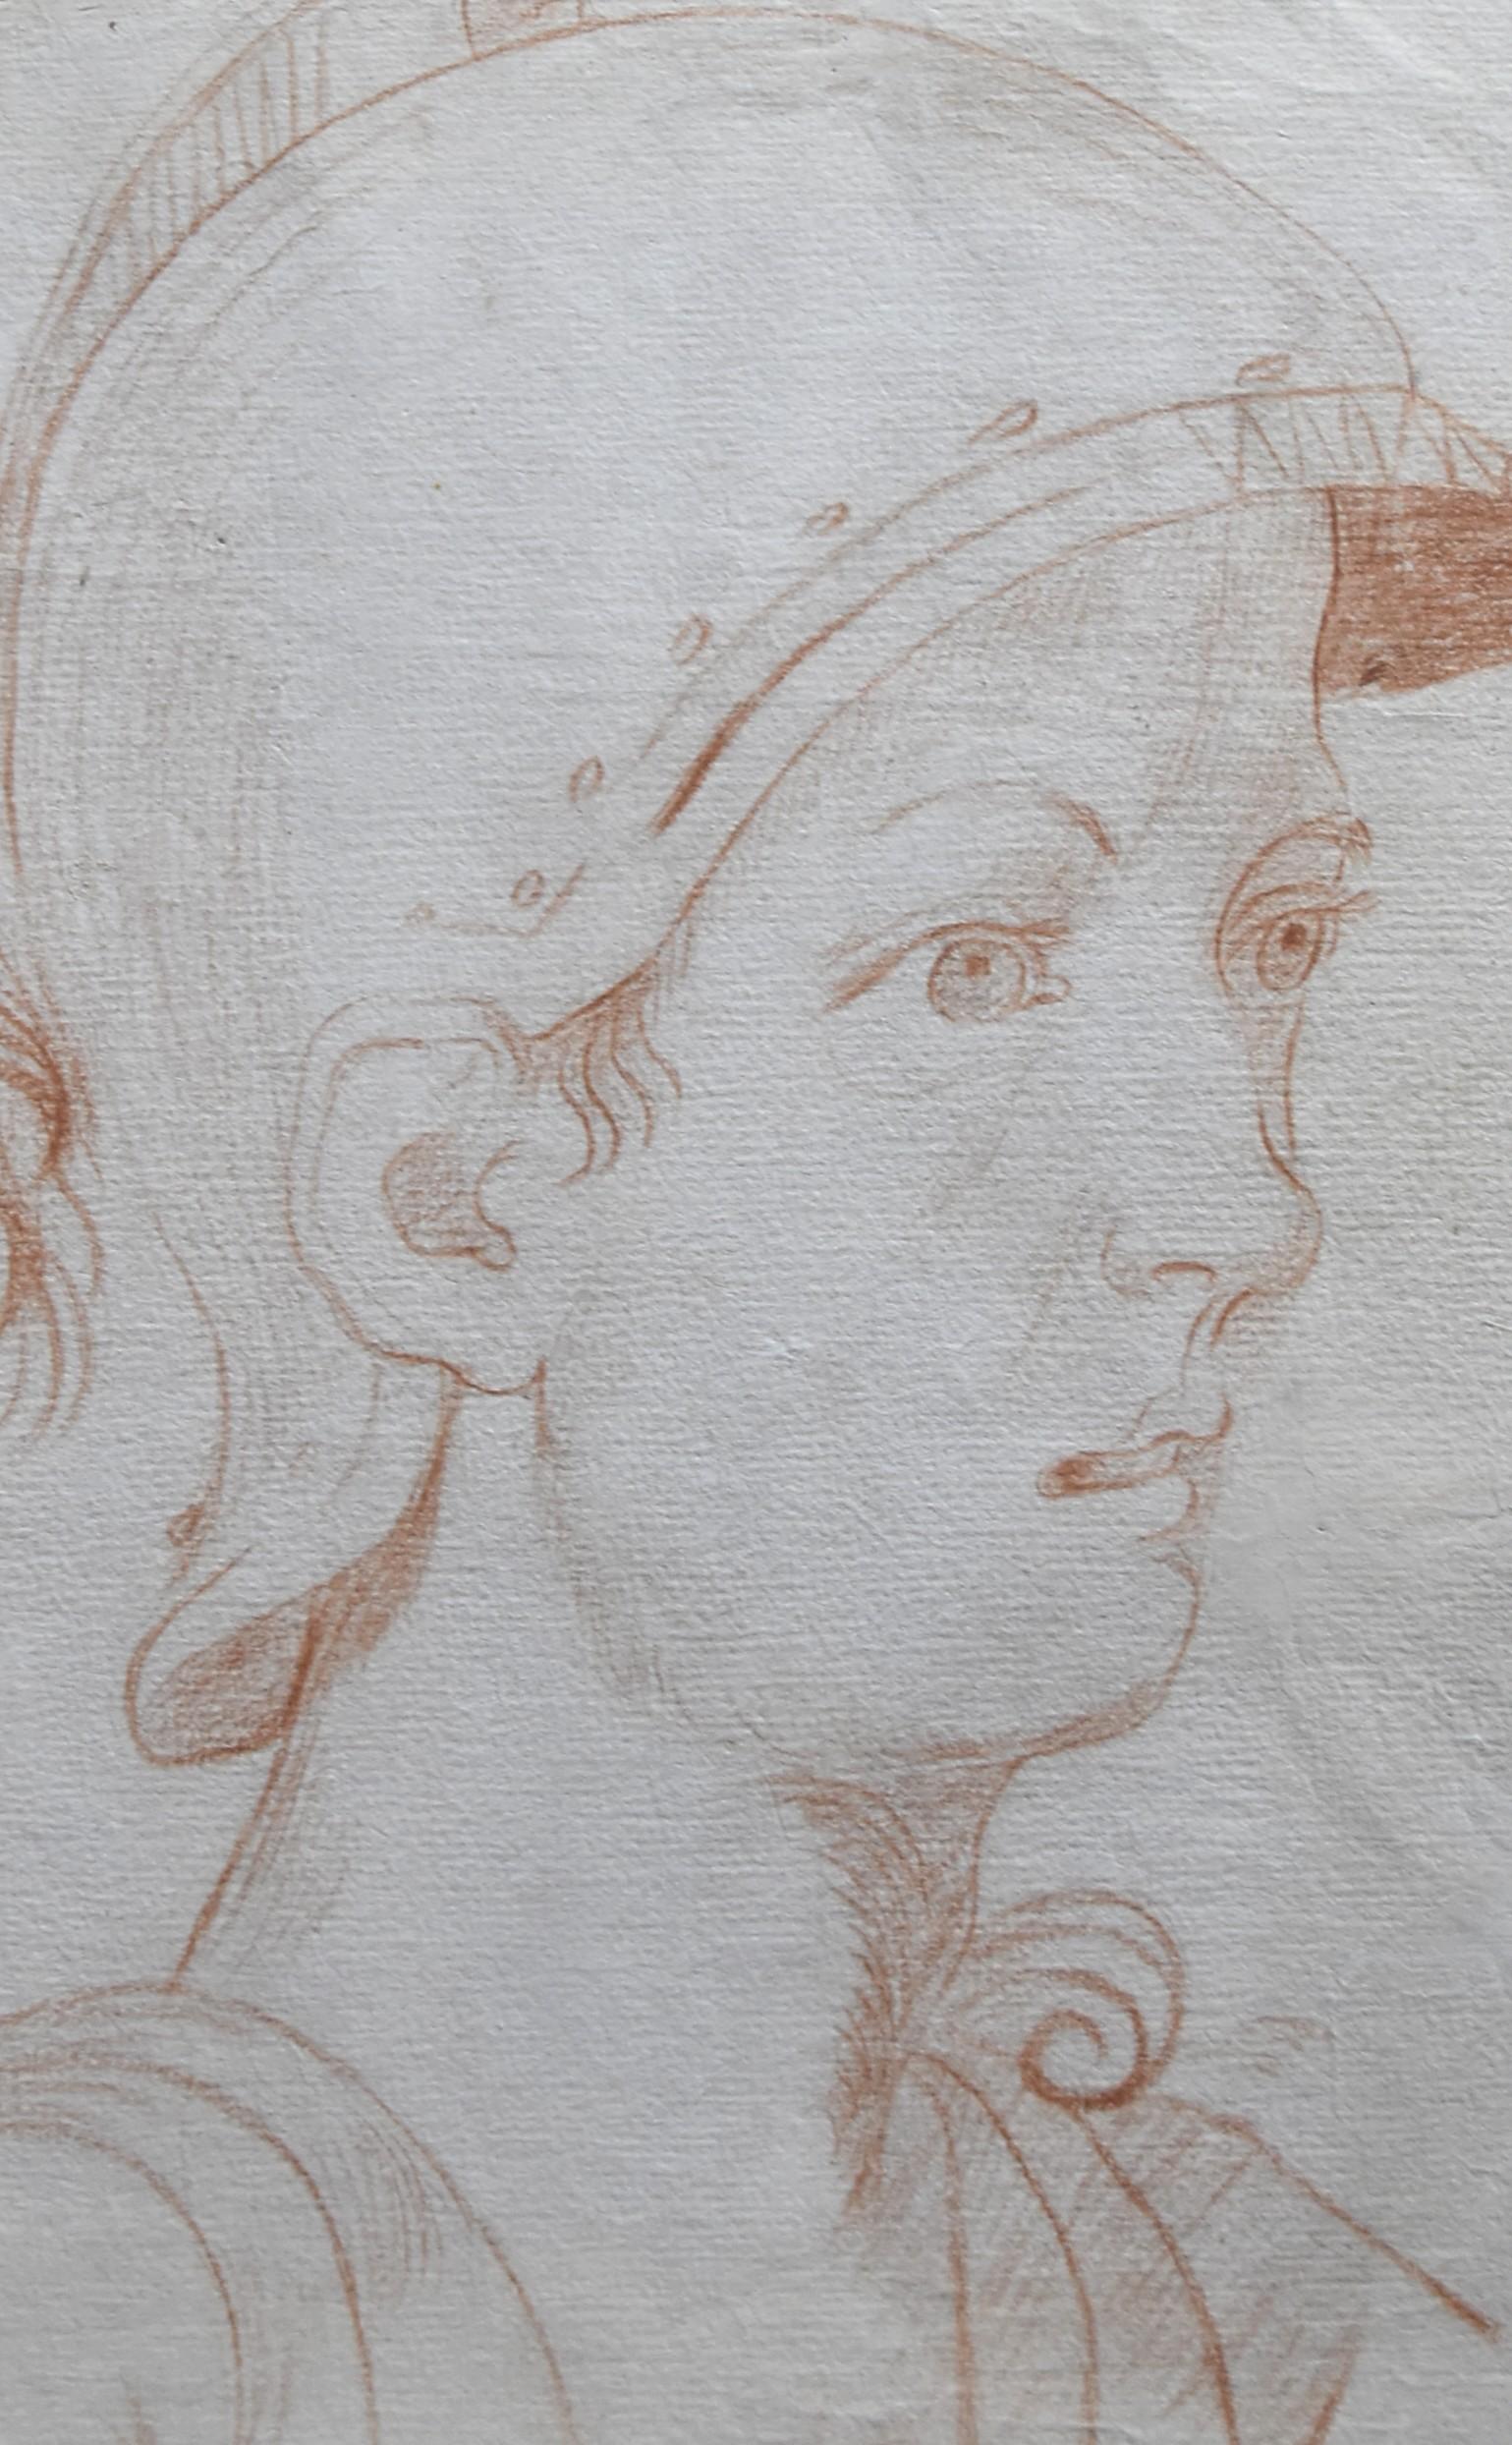 Italian School 18th Century
An Ancient soldier in profile, 
red chalk on paper
35 x 23.5 cm
in good condition, traces of folds in the lower right corner
Framed : 46.5 x 35.5 cm

This portrait of an ancient soldier is particularly striking for its